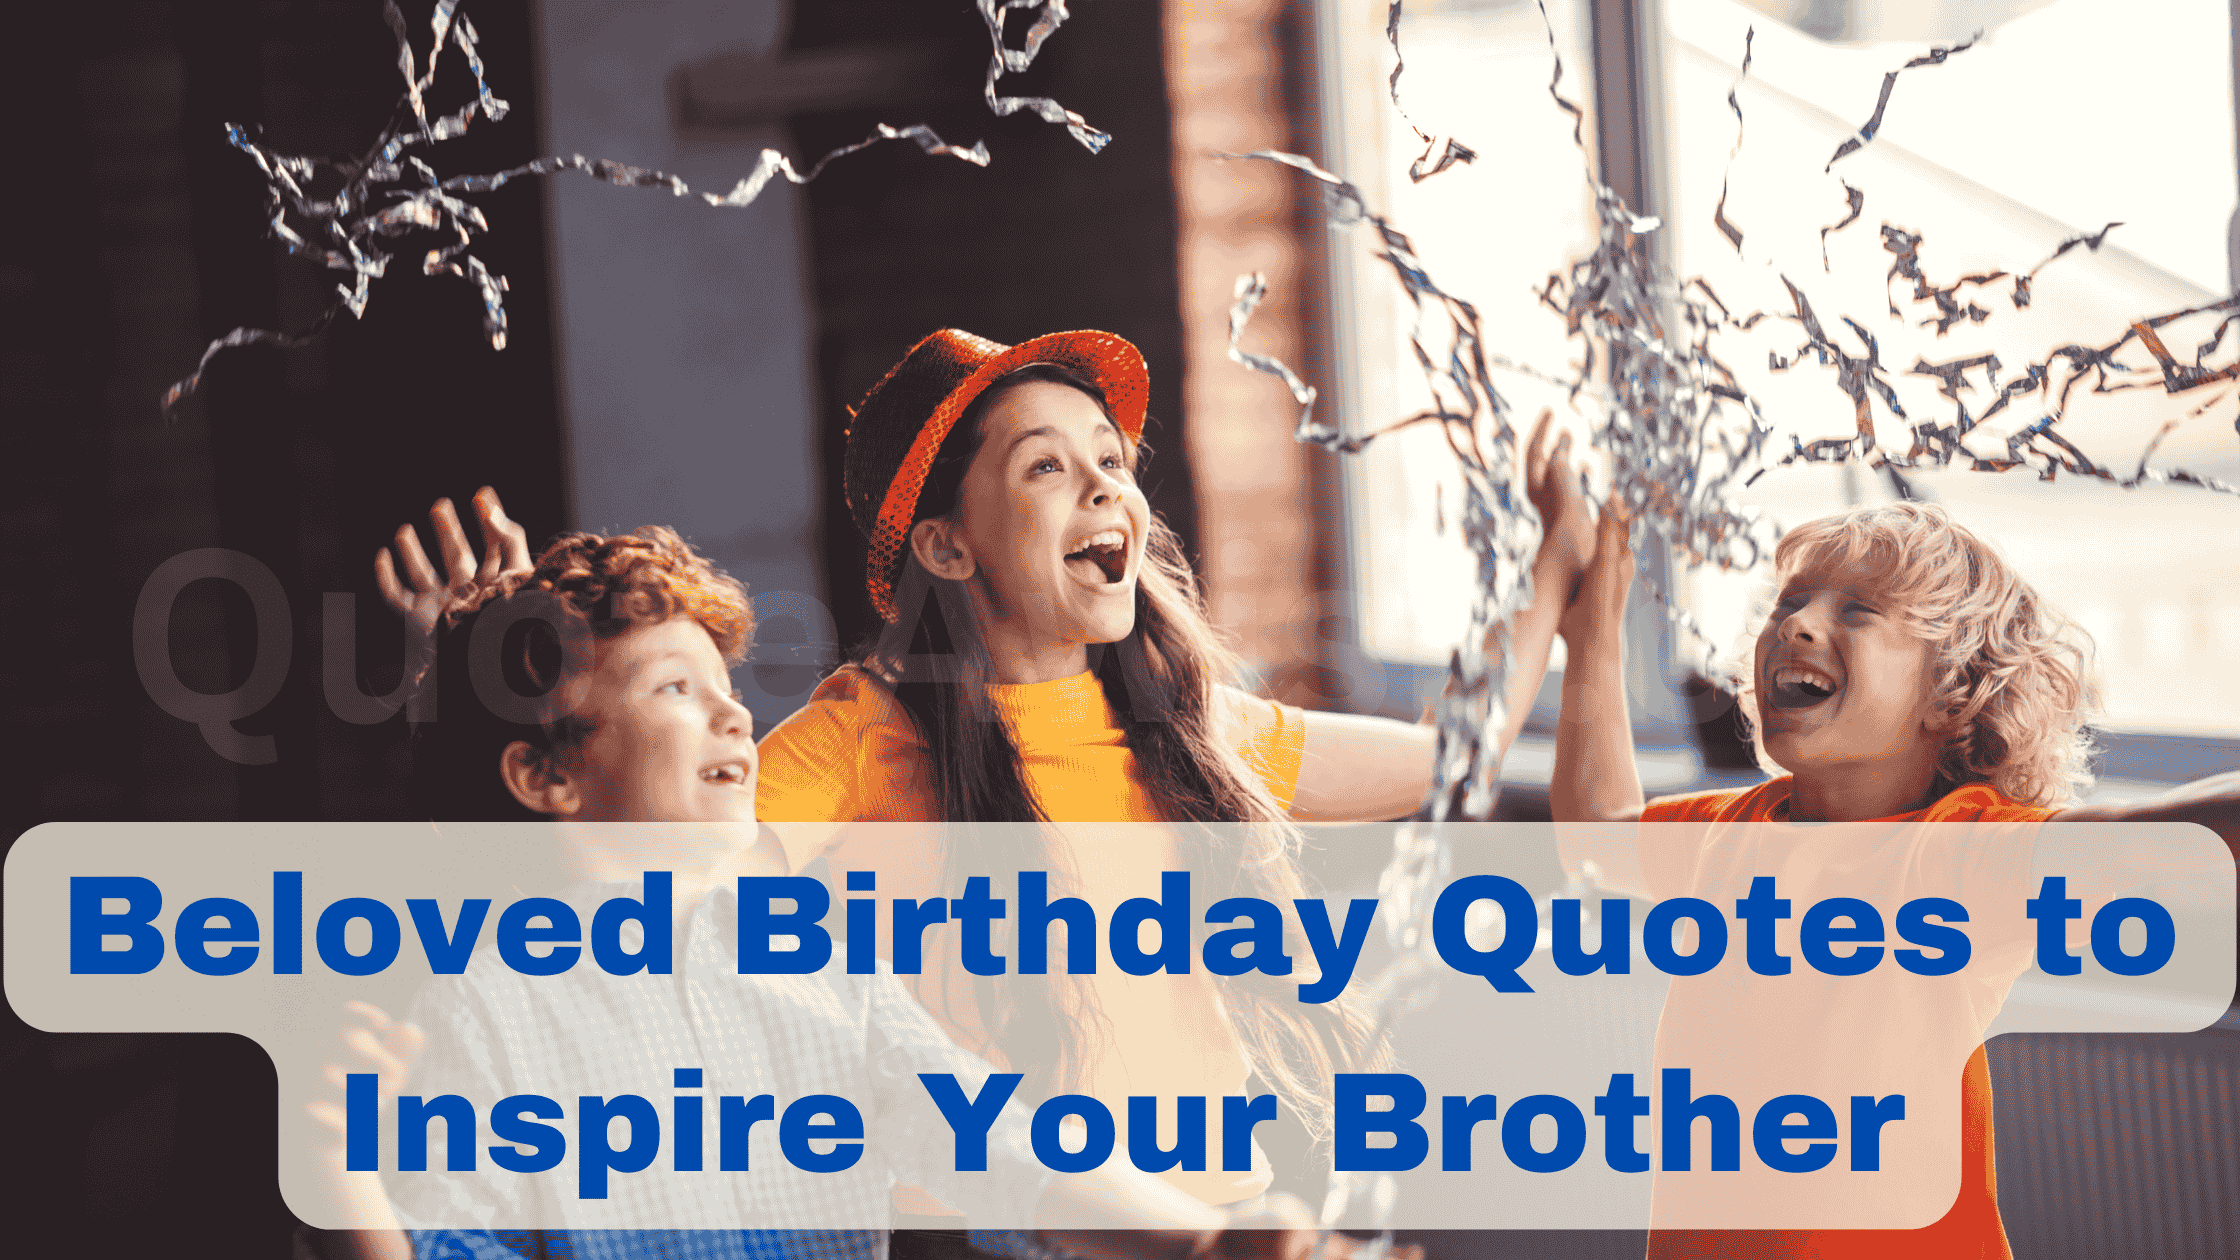 Beloved Birthday Quotes to Inspire Your Brother